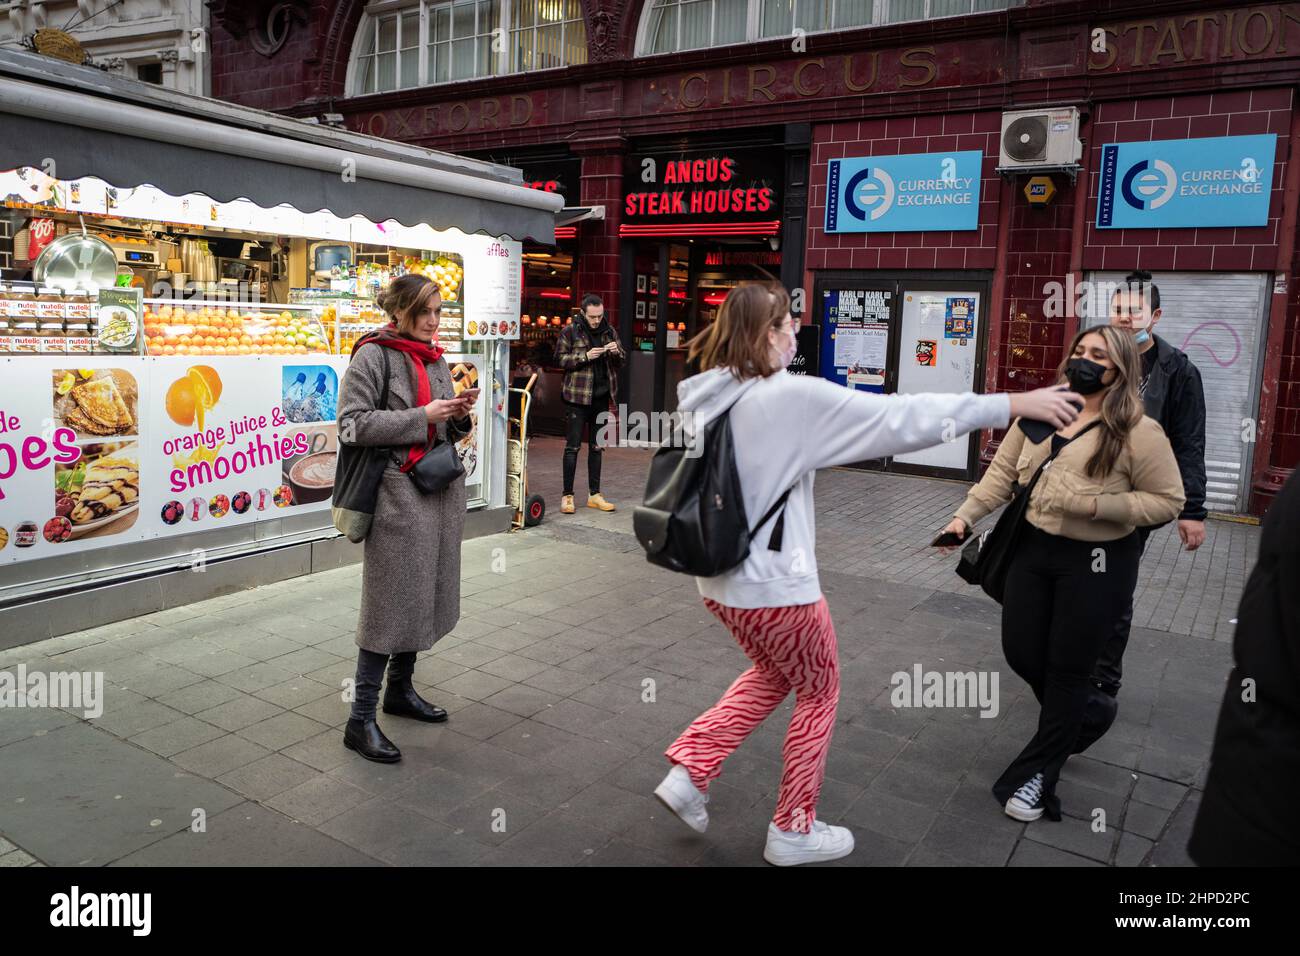 Arms open to greet a friend on London's Oxford Street. Picture taken by tube station in front of a street food vendor. Stock Photo